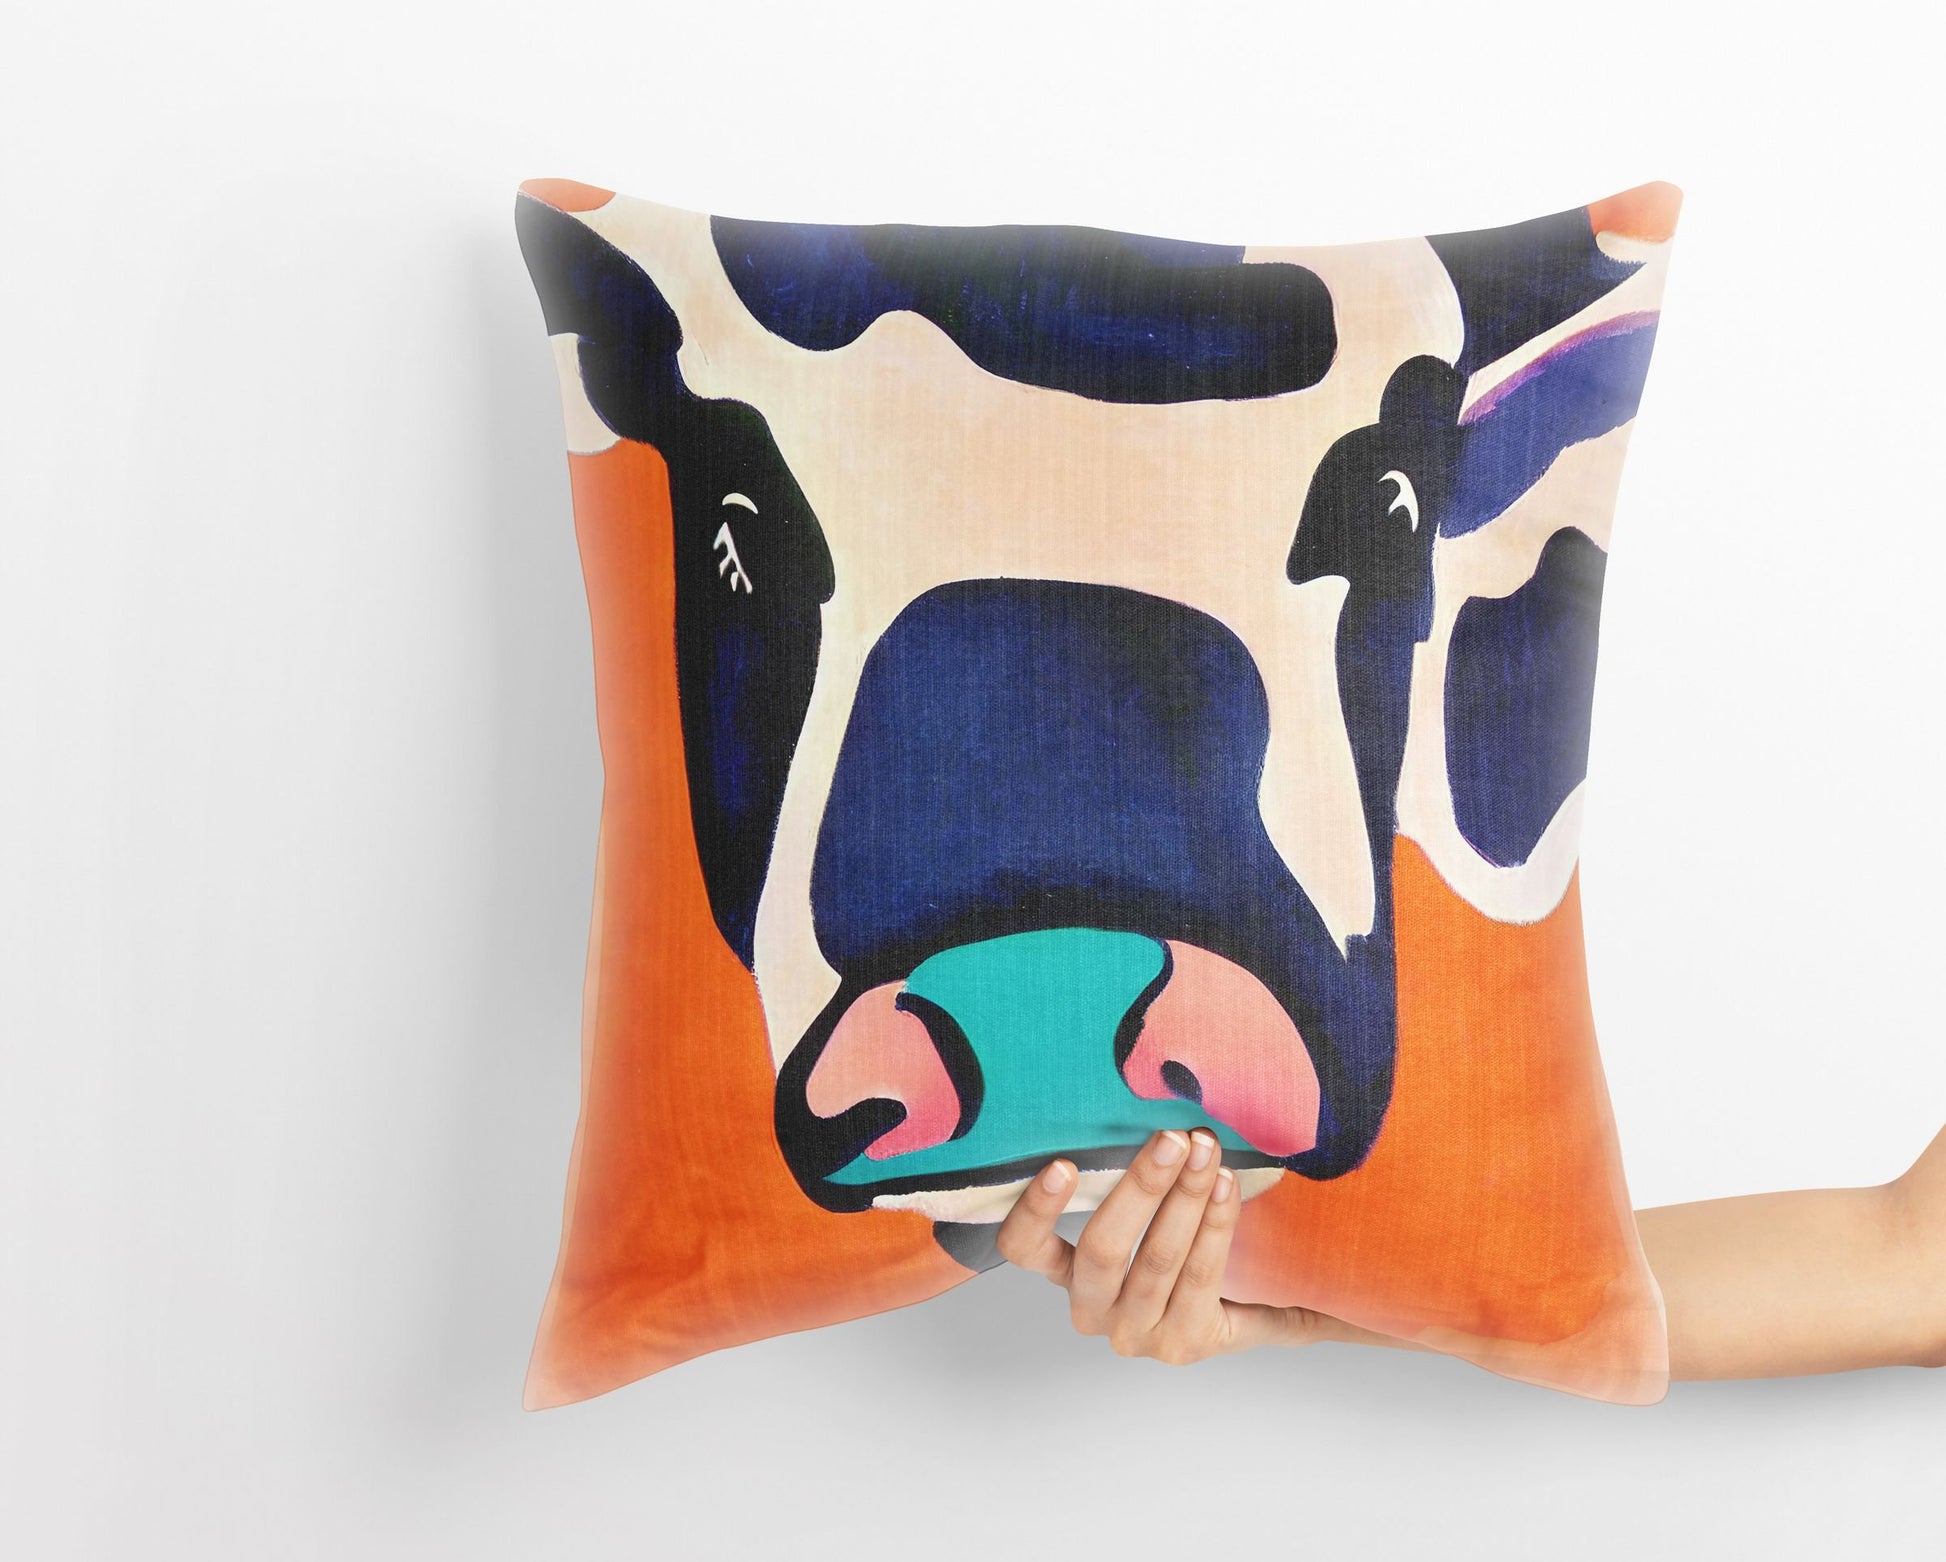 Dairy Cattle Original Art, Throw Pillow Cover, Bee Pillow Cover, Comfortable, Colorful Pillow Case, Contemporary Pillow, Indoor Pillow Cases